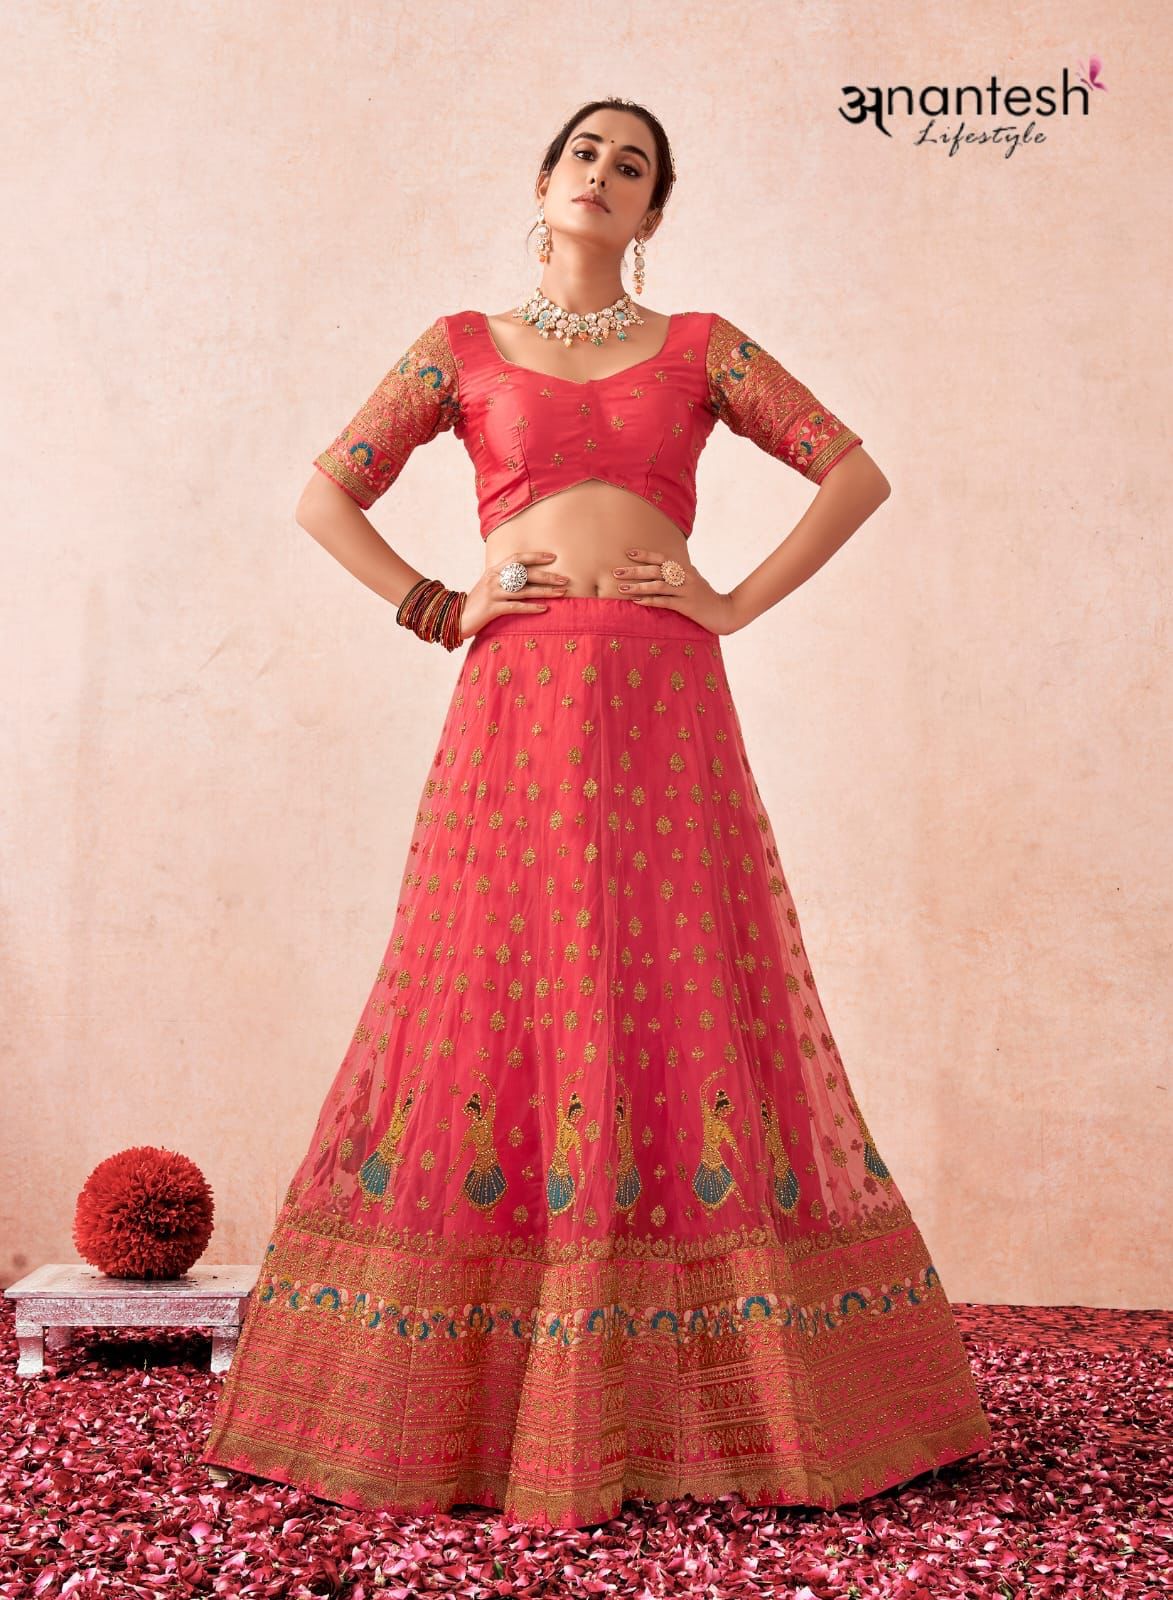 DESIGNER WEDDING BRIDAL PARTY WEAR LEHENGA CHOLI IN HEAVY NET ANANTESH SM 1003 Anant Tex Exports Private Limited